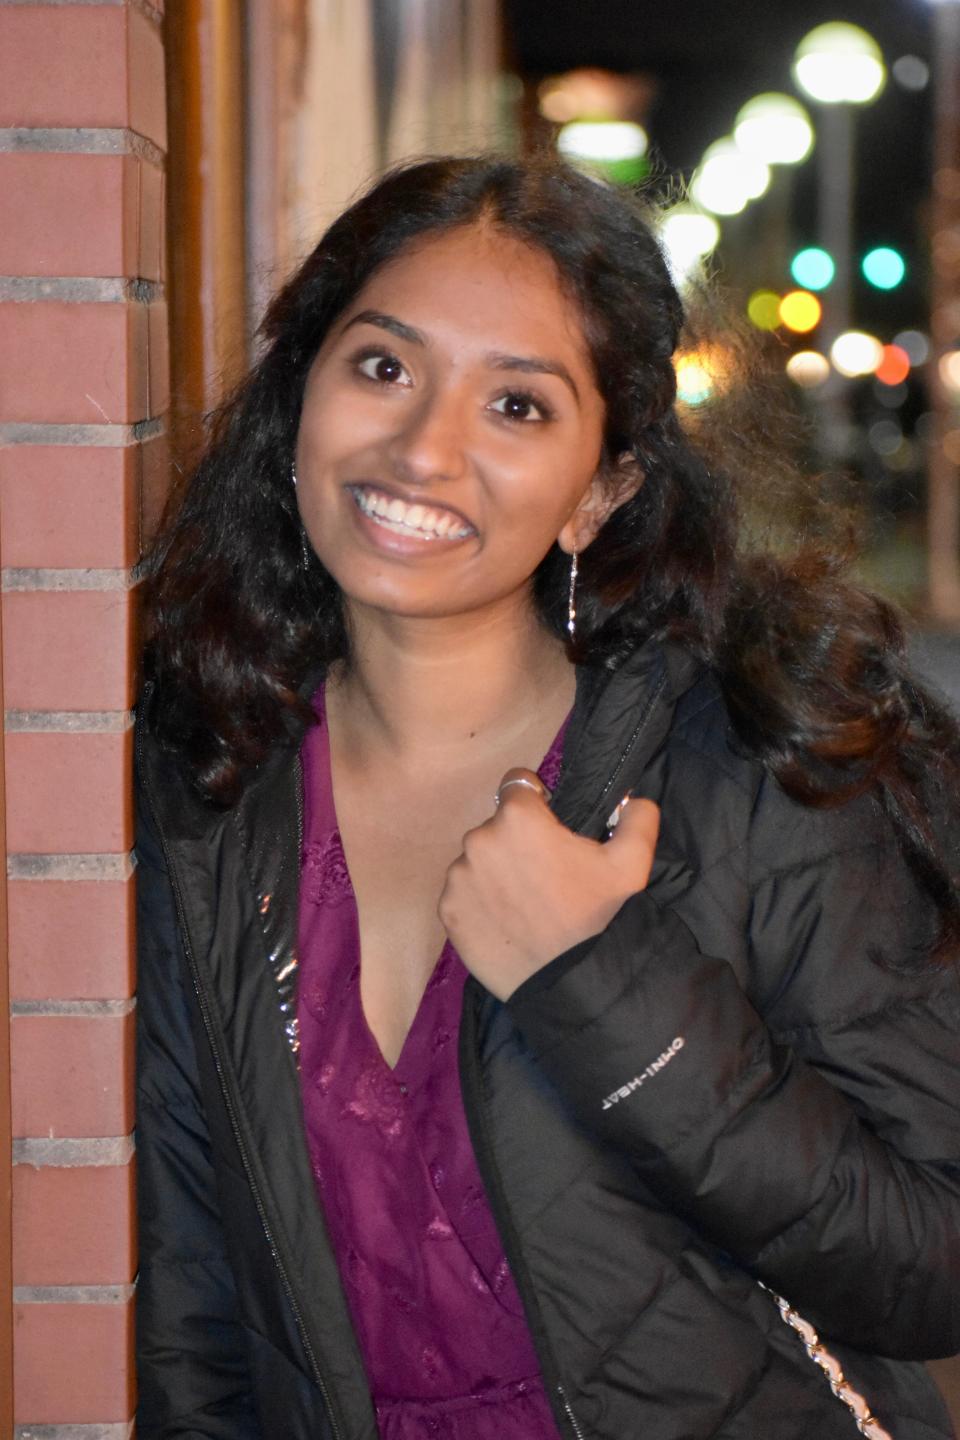 Priya Ganji, 19, of the University of Michigan, faces being deported when she turns 21, even though she and her parents immigrated legally to the U.S. There are about 200,000 u0022Documented Dreamersu0022 like her in the country, thousands of them in Michigan.